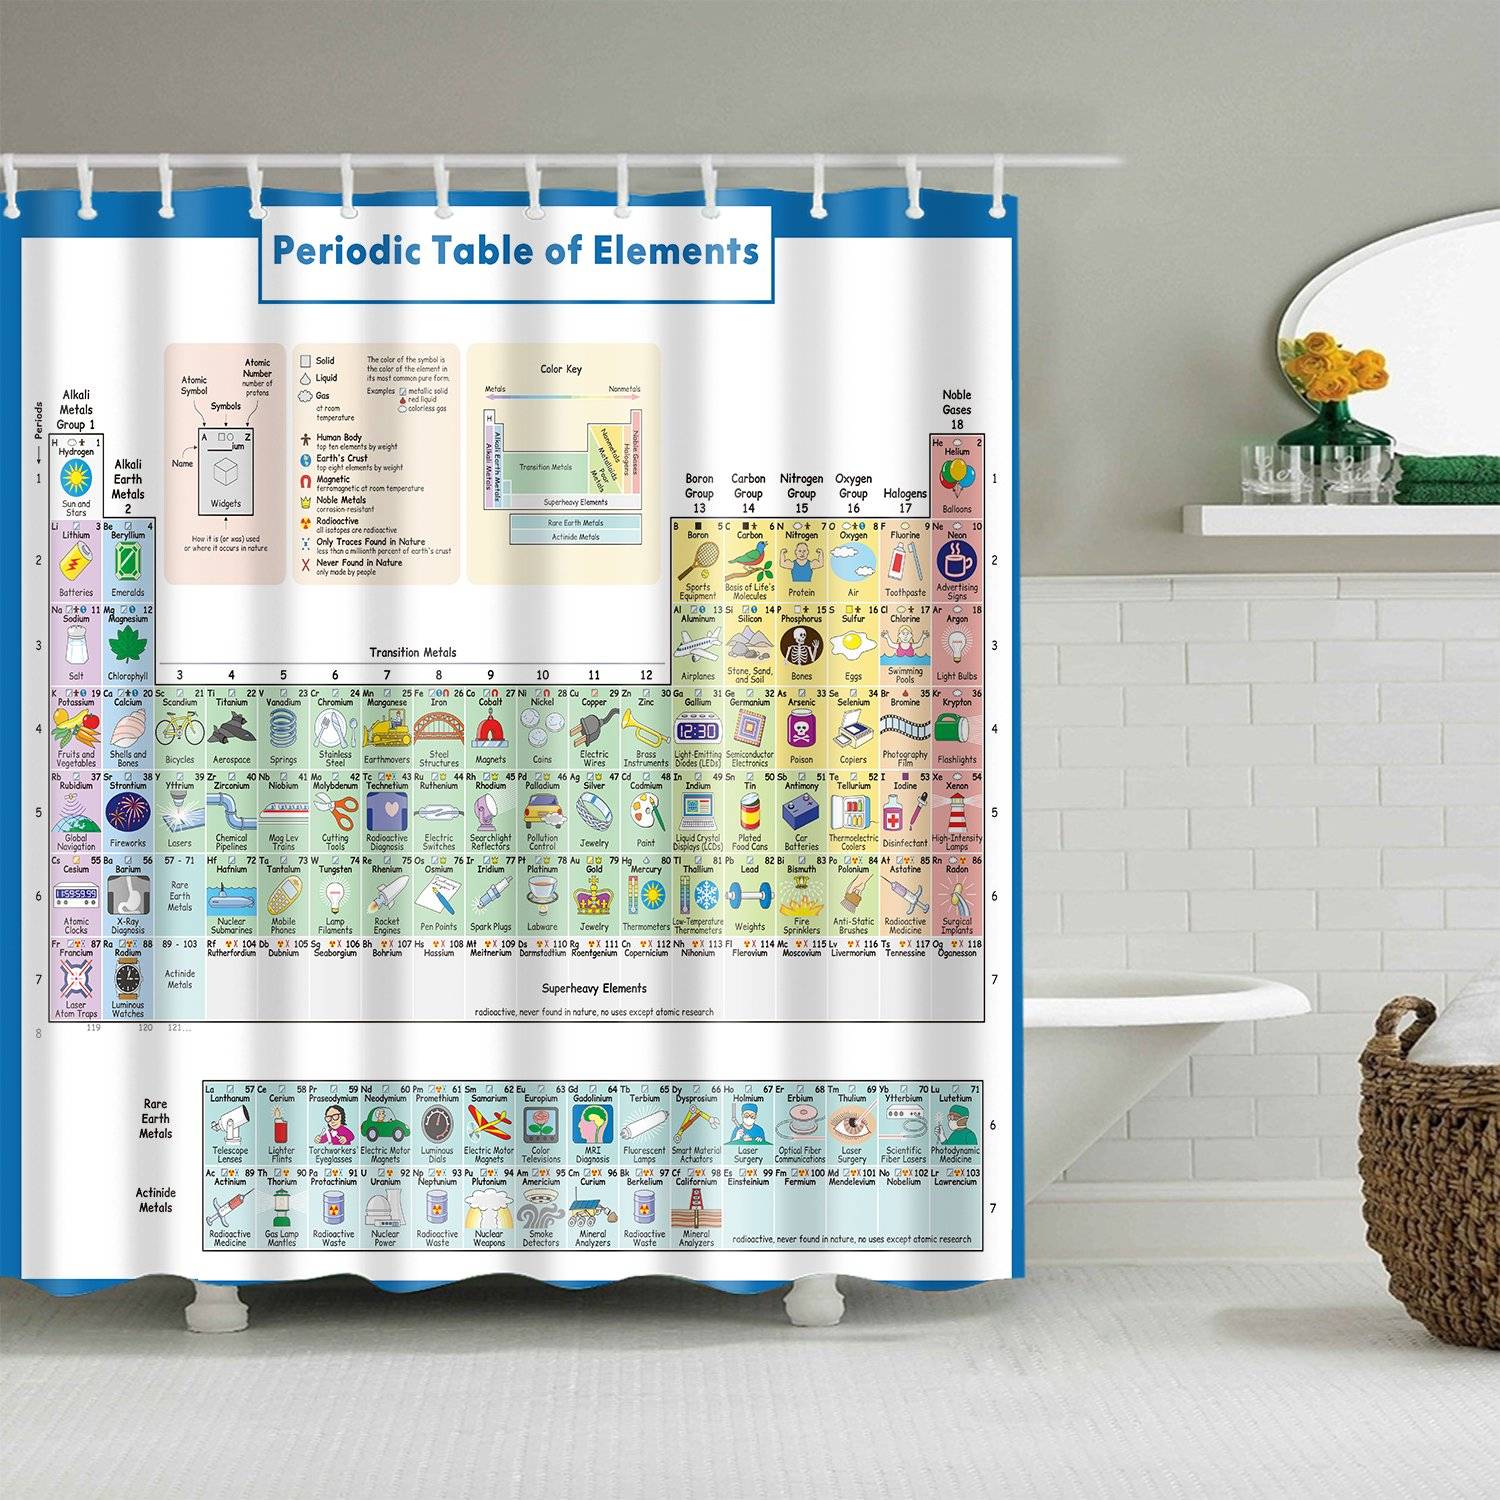 Match with Iconic Science Illustrated Educational Periodic Table of Elements Shower Curtain